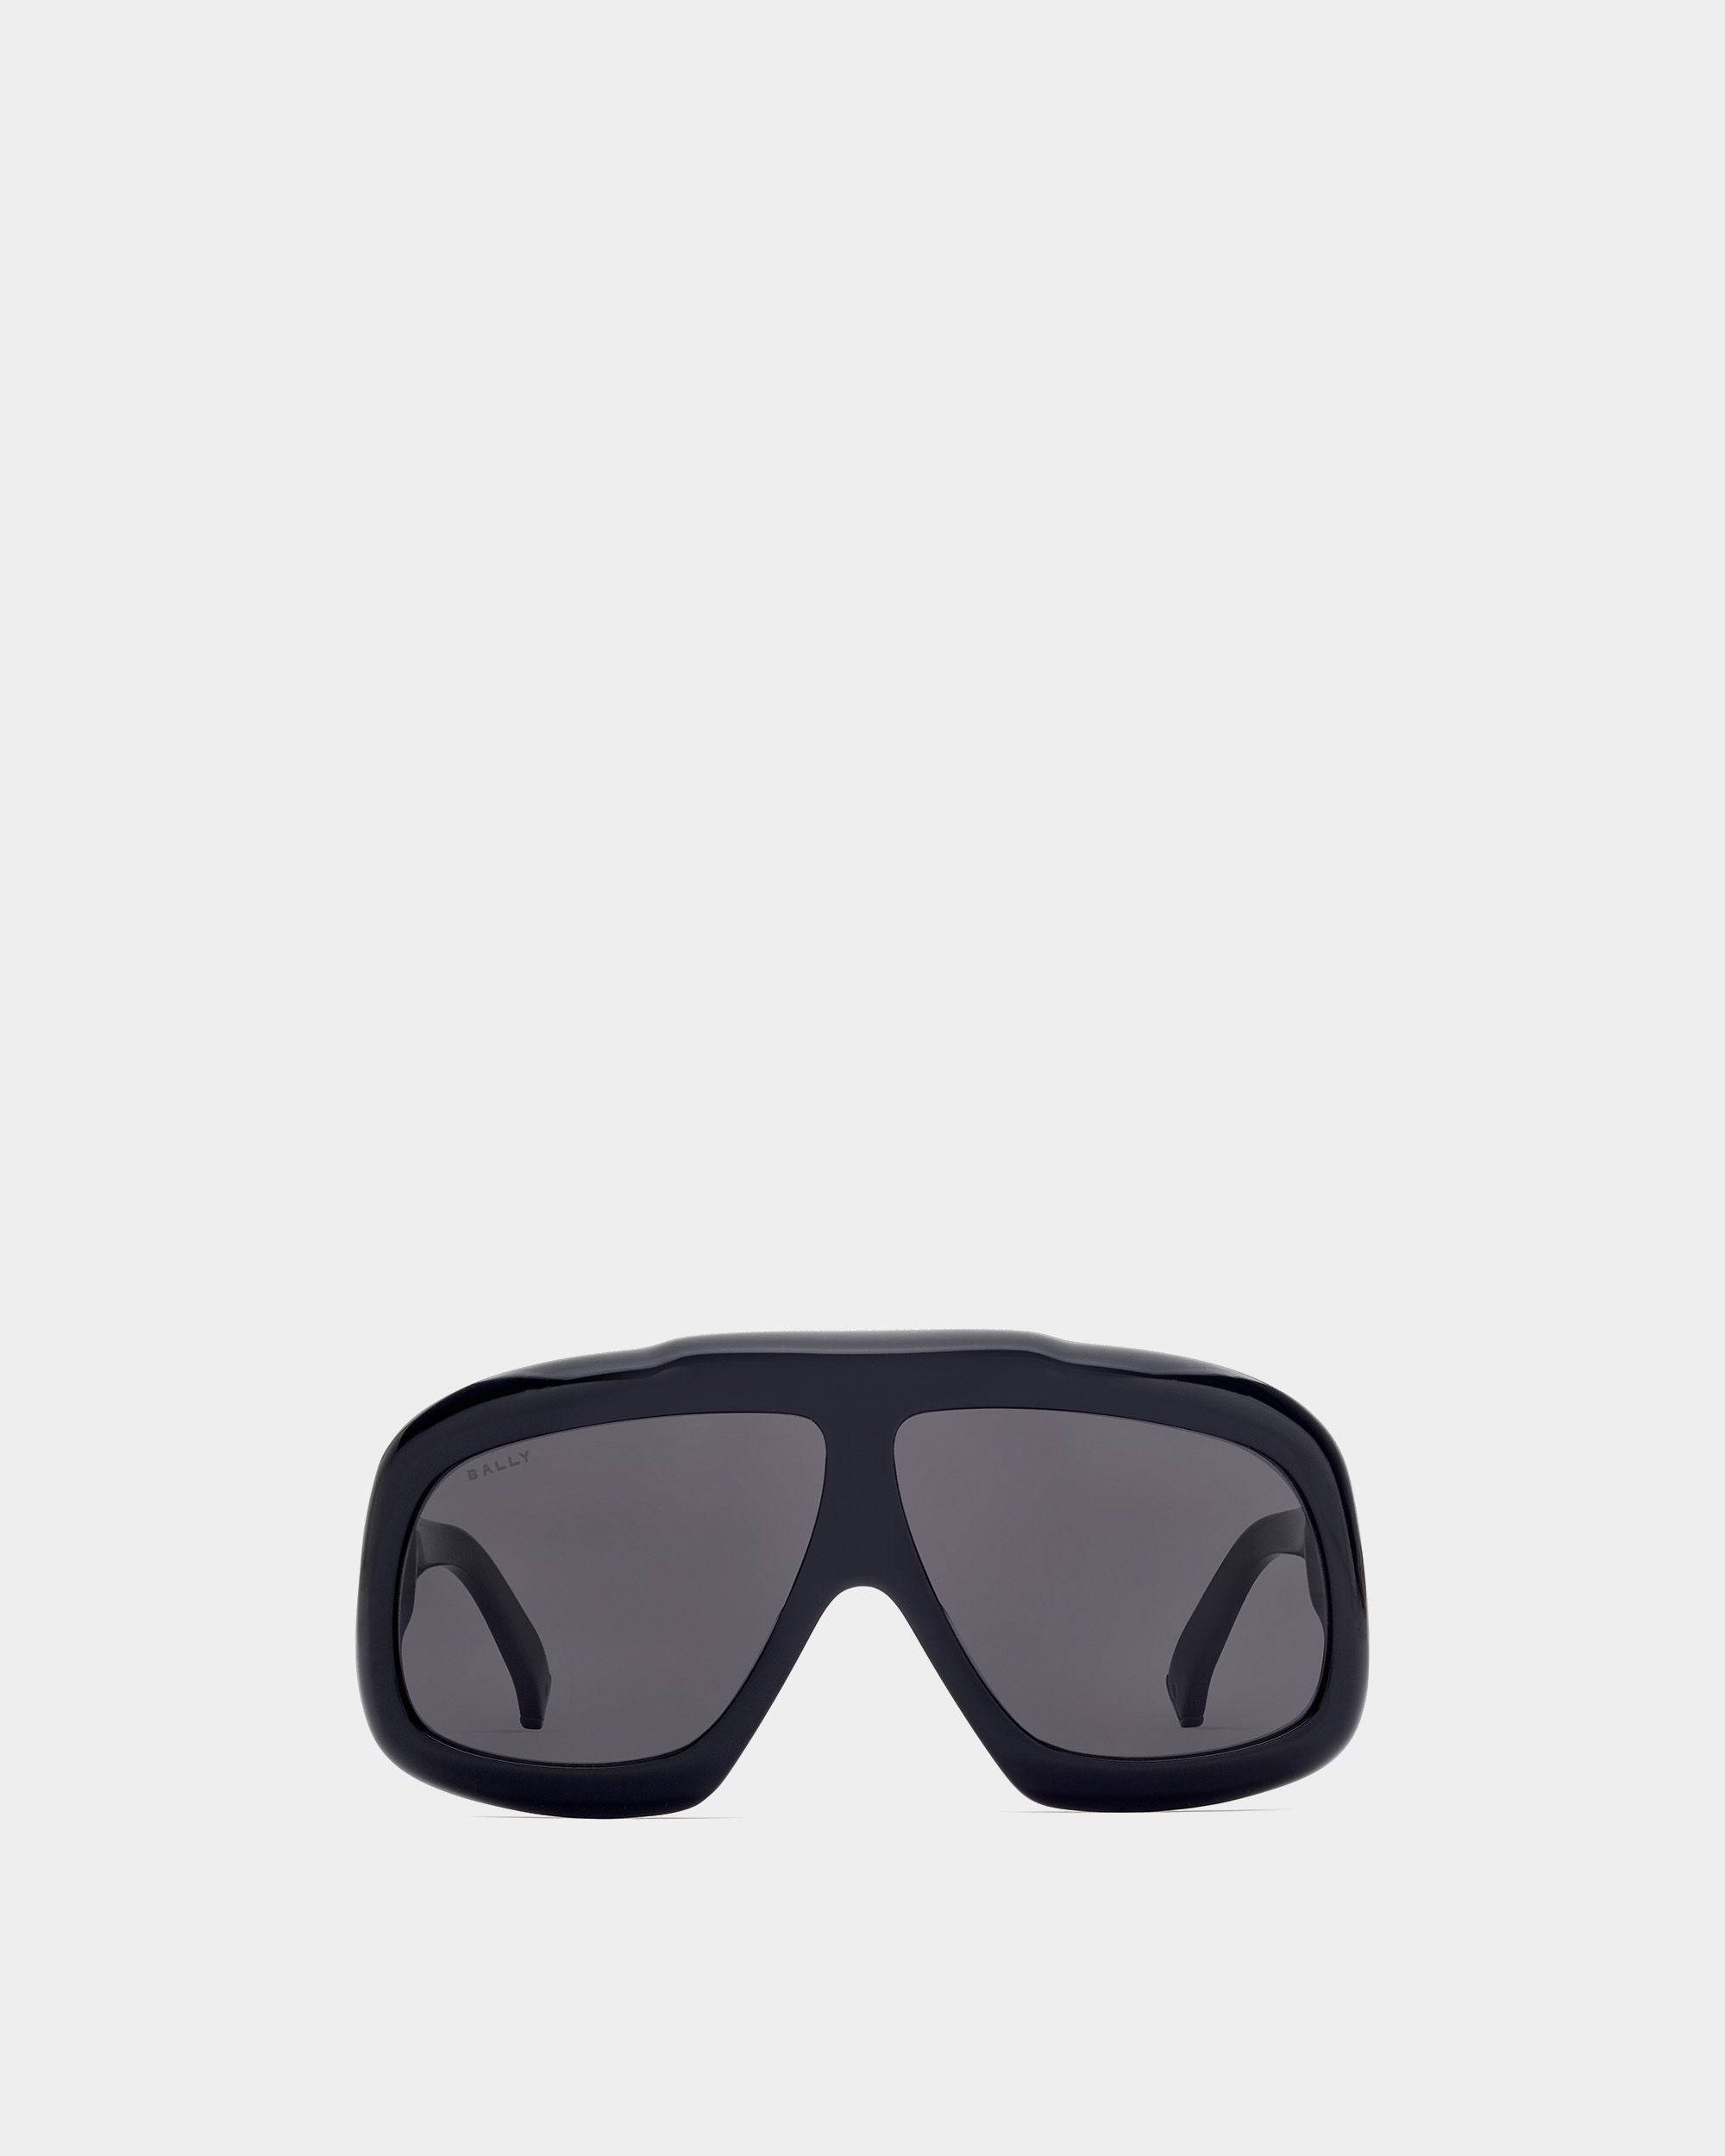 Eyger Acetate Sunglasses In Black and Smoke | Bally | Still Life Front